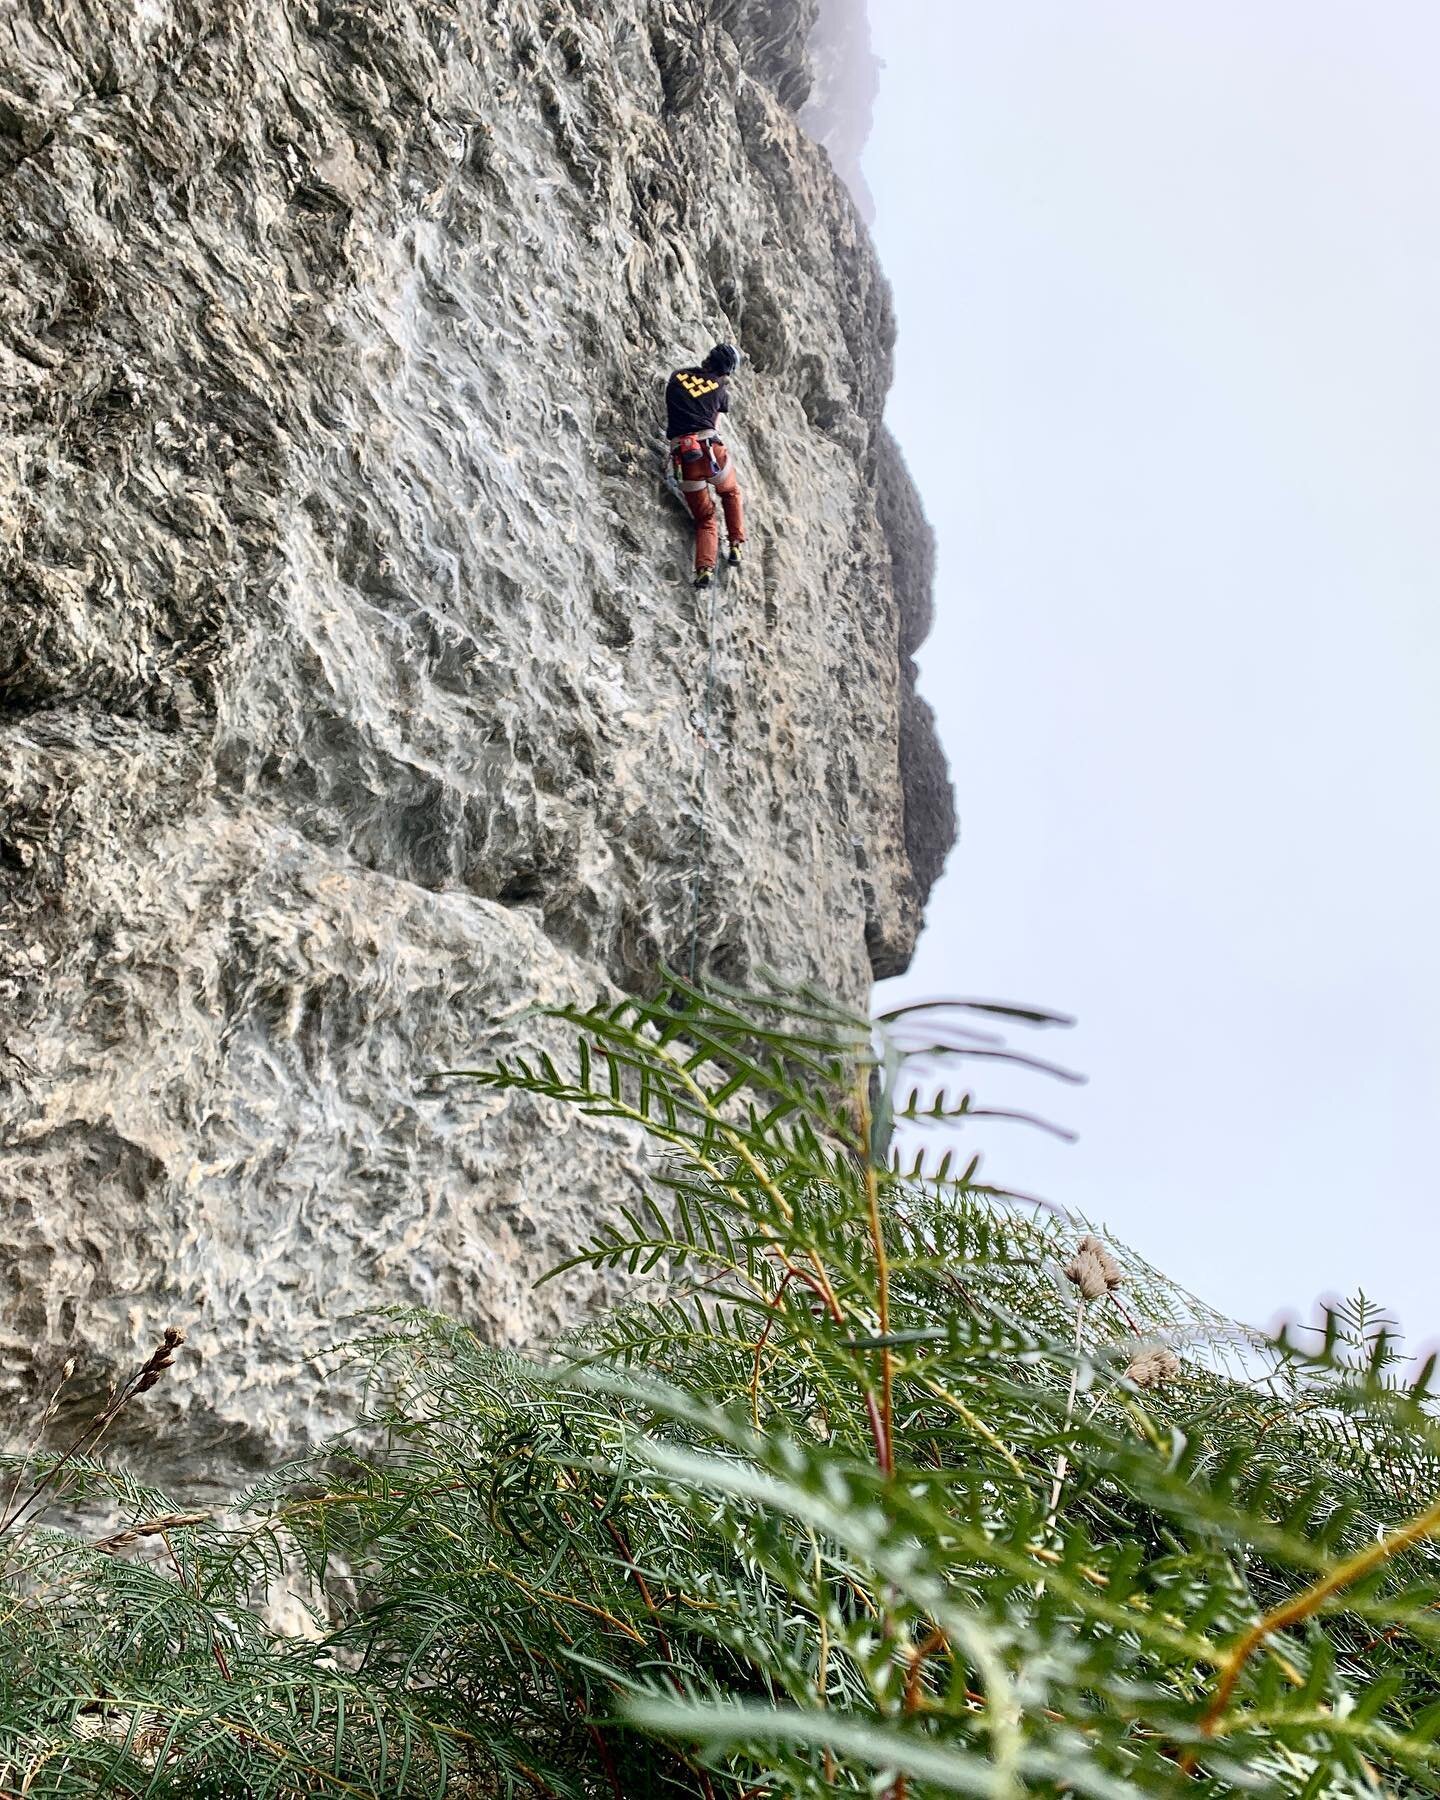 Who&rsquo;s getting out on these Autumn days? Some great climbs to be had on the sunny aspects! Get after it 🤟 

&bull;
&bull;
&bull;

#queenstownclimbingclub #climbing #conservation #queenstown #rockclimbing #alpineclimbing #queenstownlive #climbin